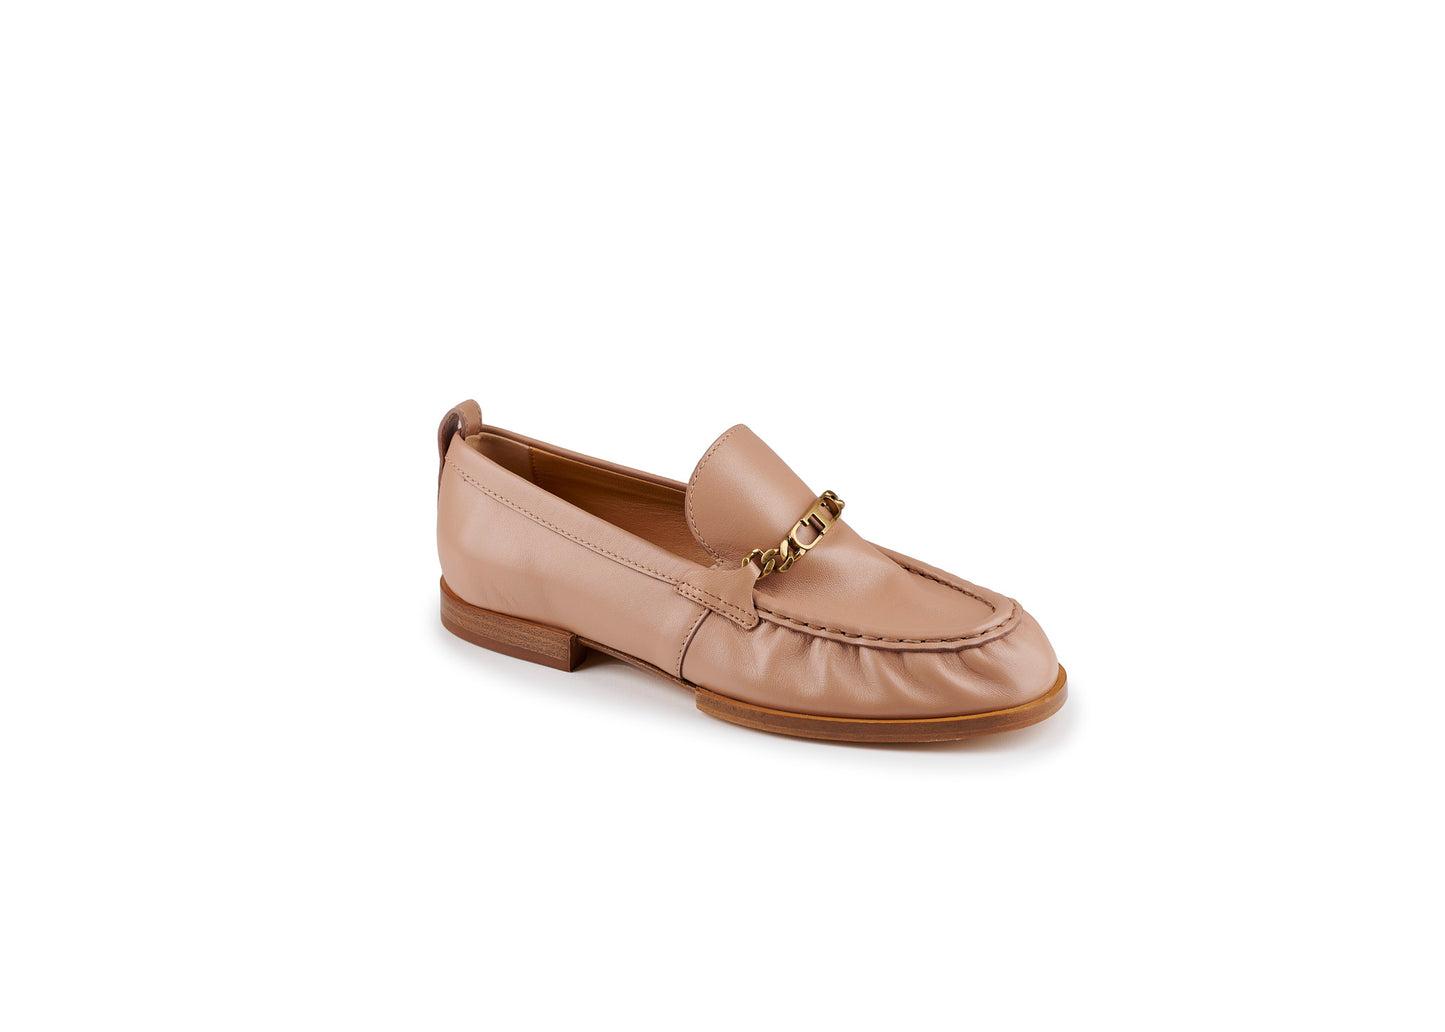 SALE Chain Link Loafer Nappa Leather Nude was $1195